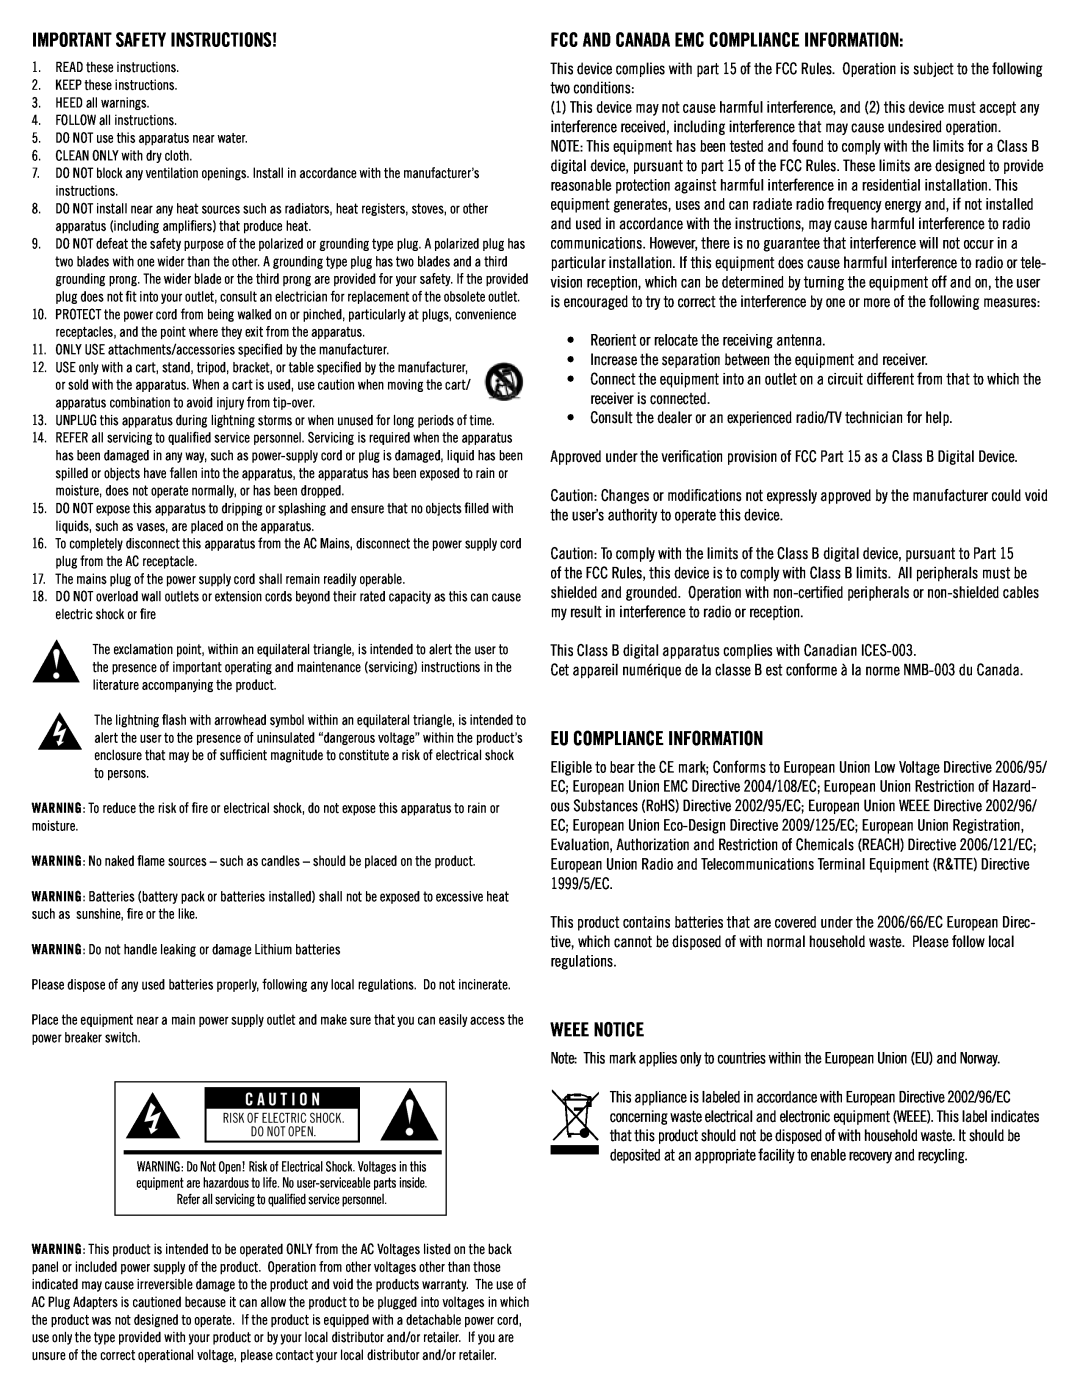 Klipsch SB3 Important Safety INSTRUCTIONS, Fcc And Canada Emc Compliance Information, Eu Compliance Information 